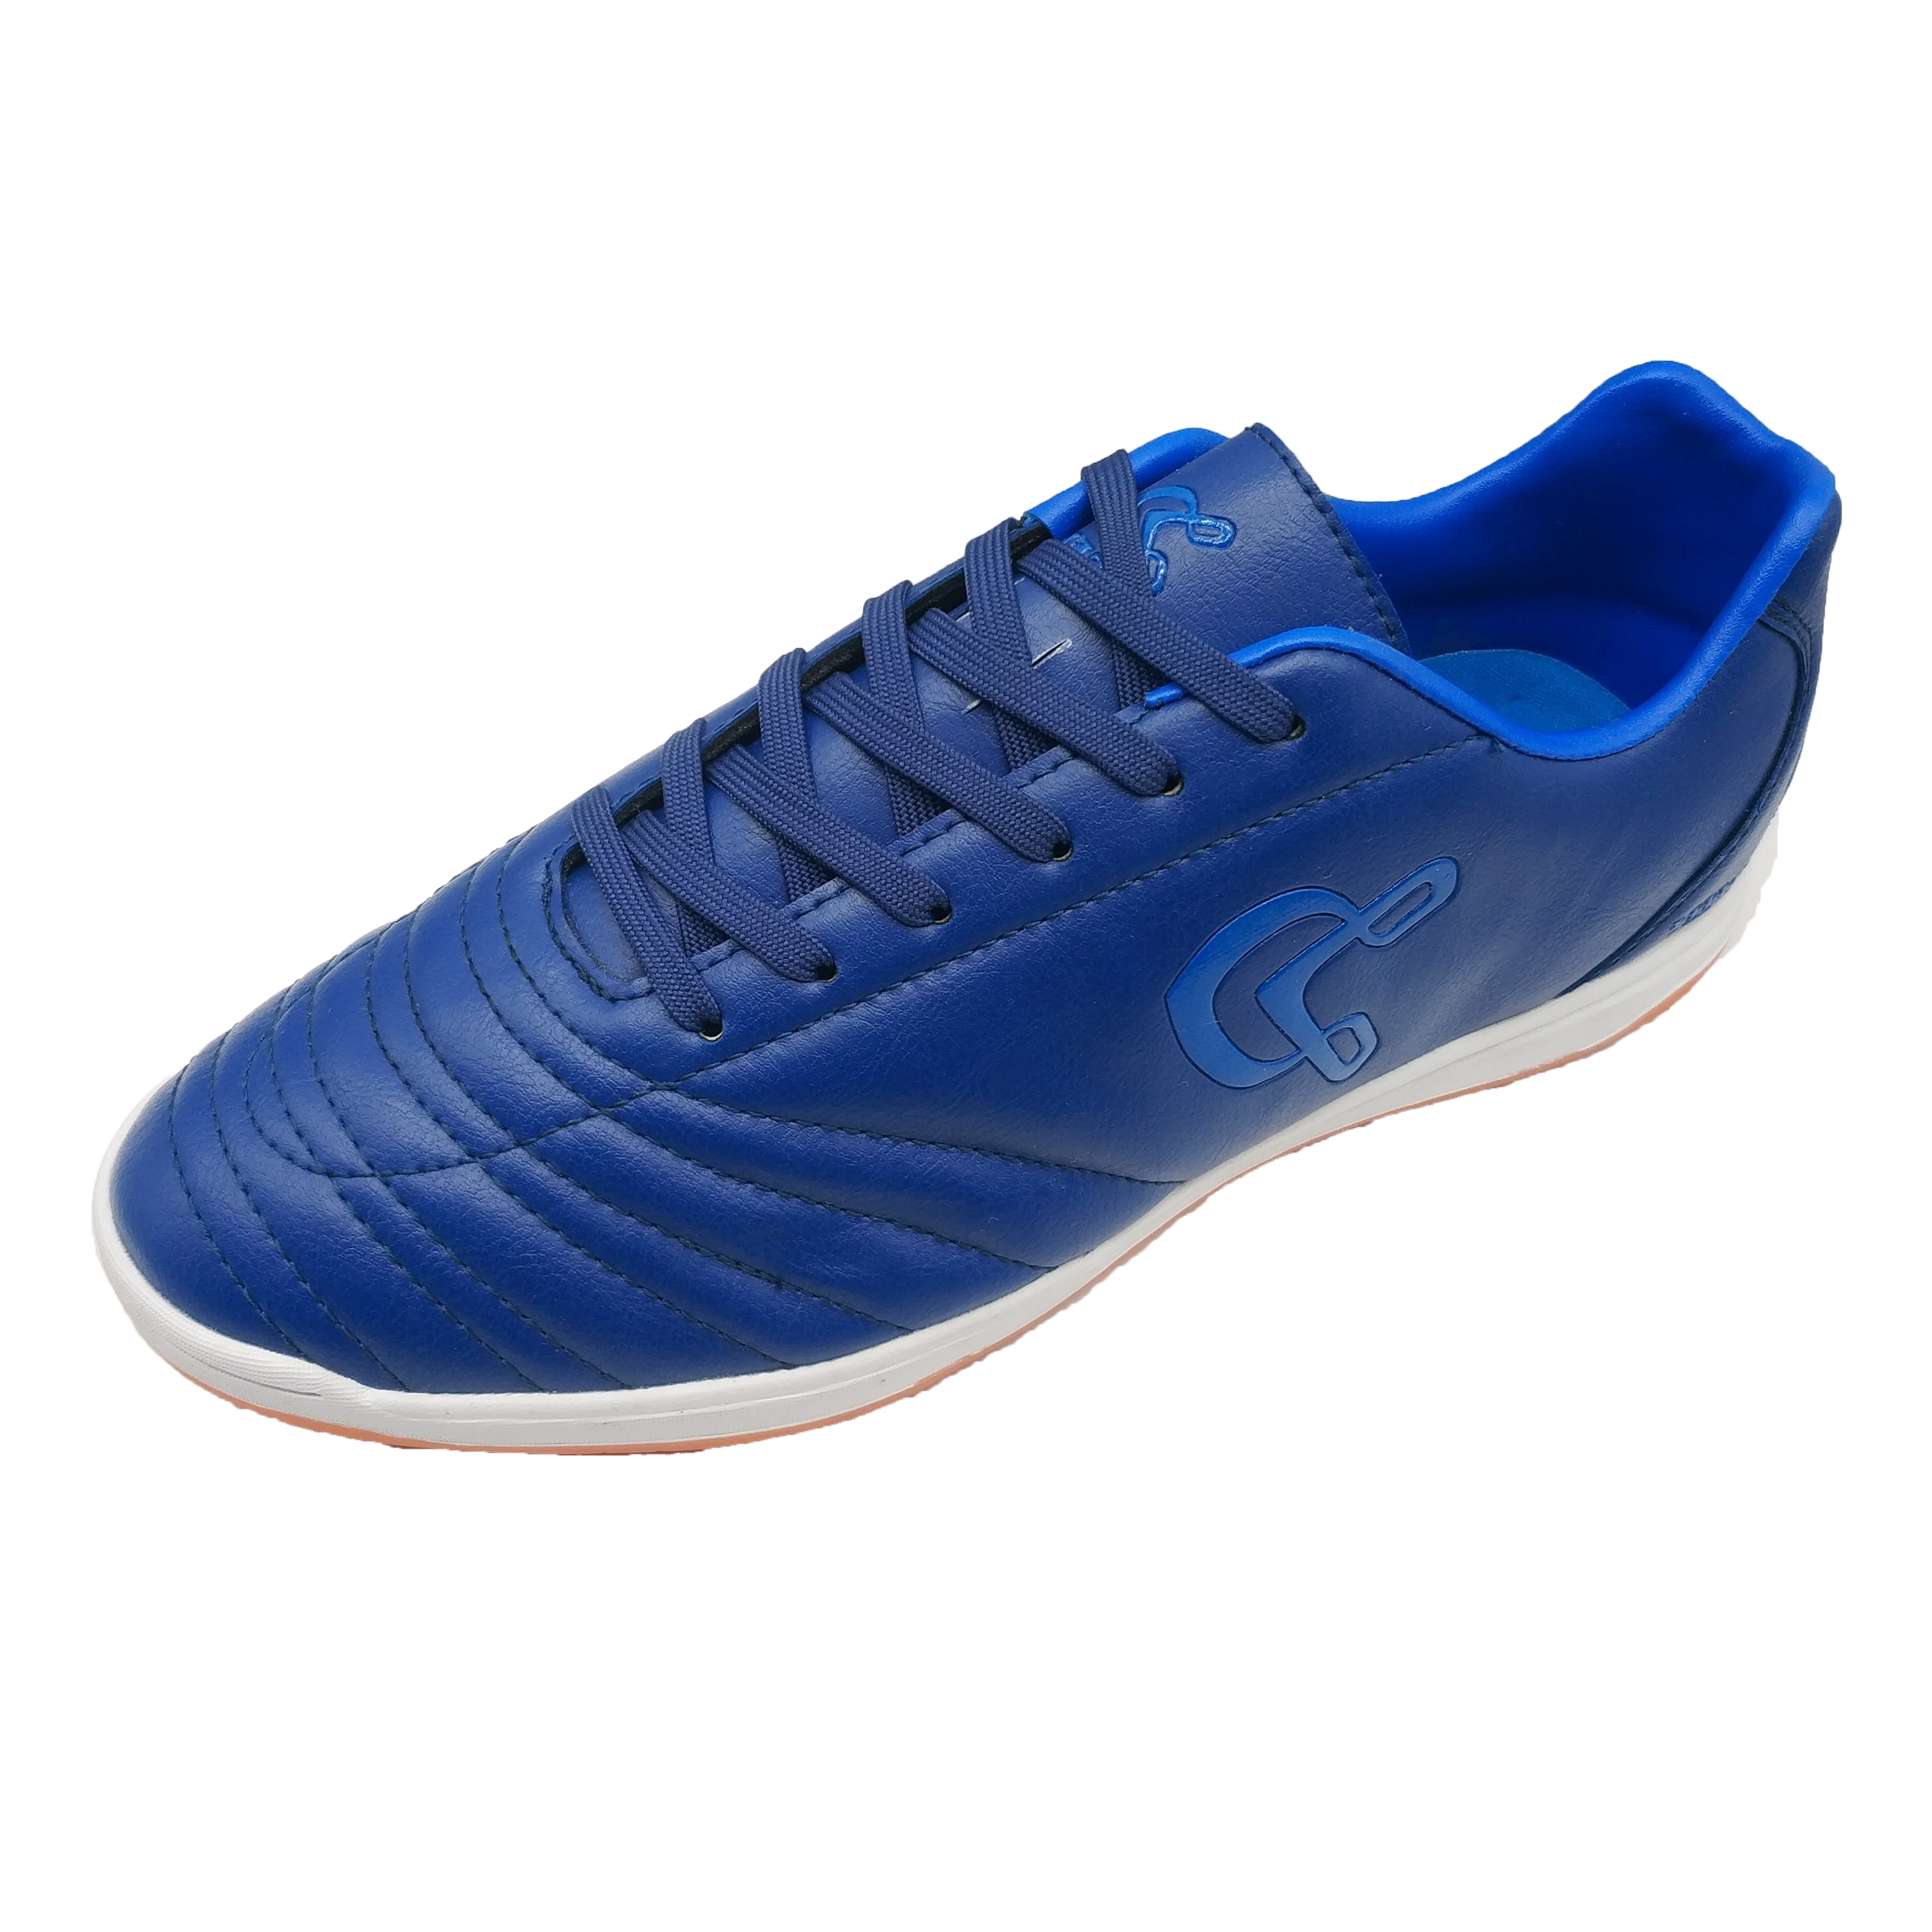 Factory Design Futsal Shoes  Indoor Durable Soccer Shoes